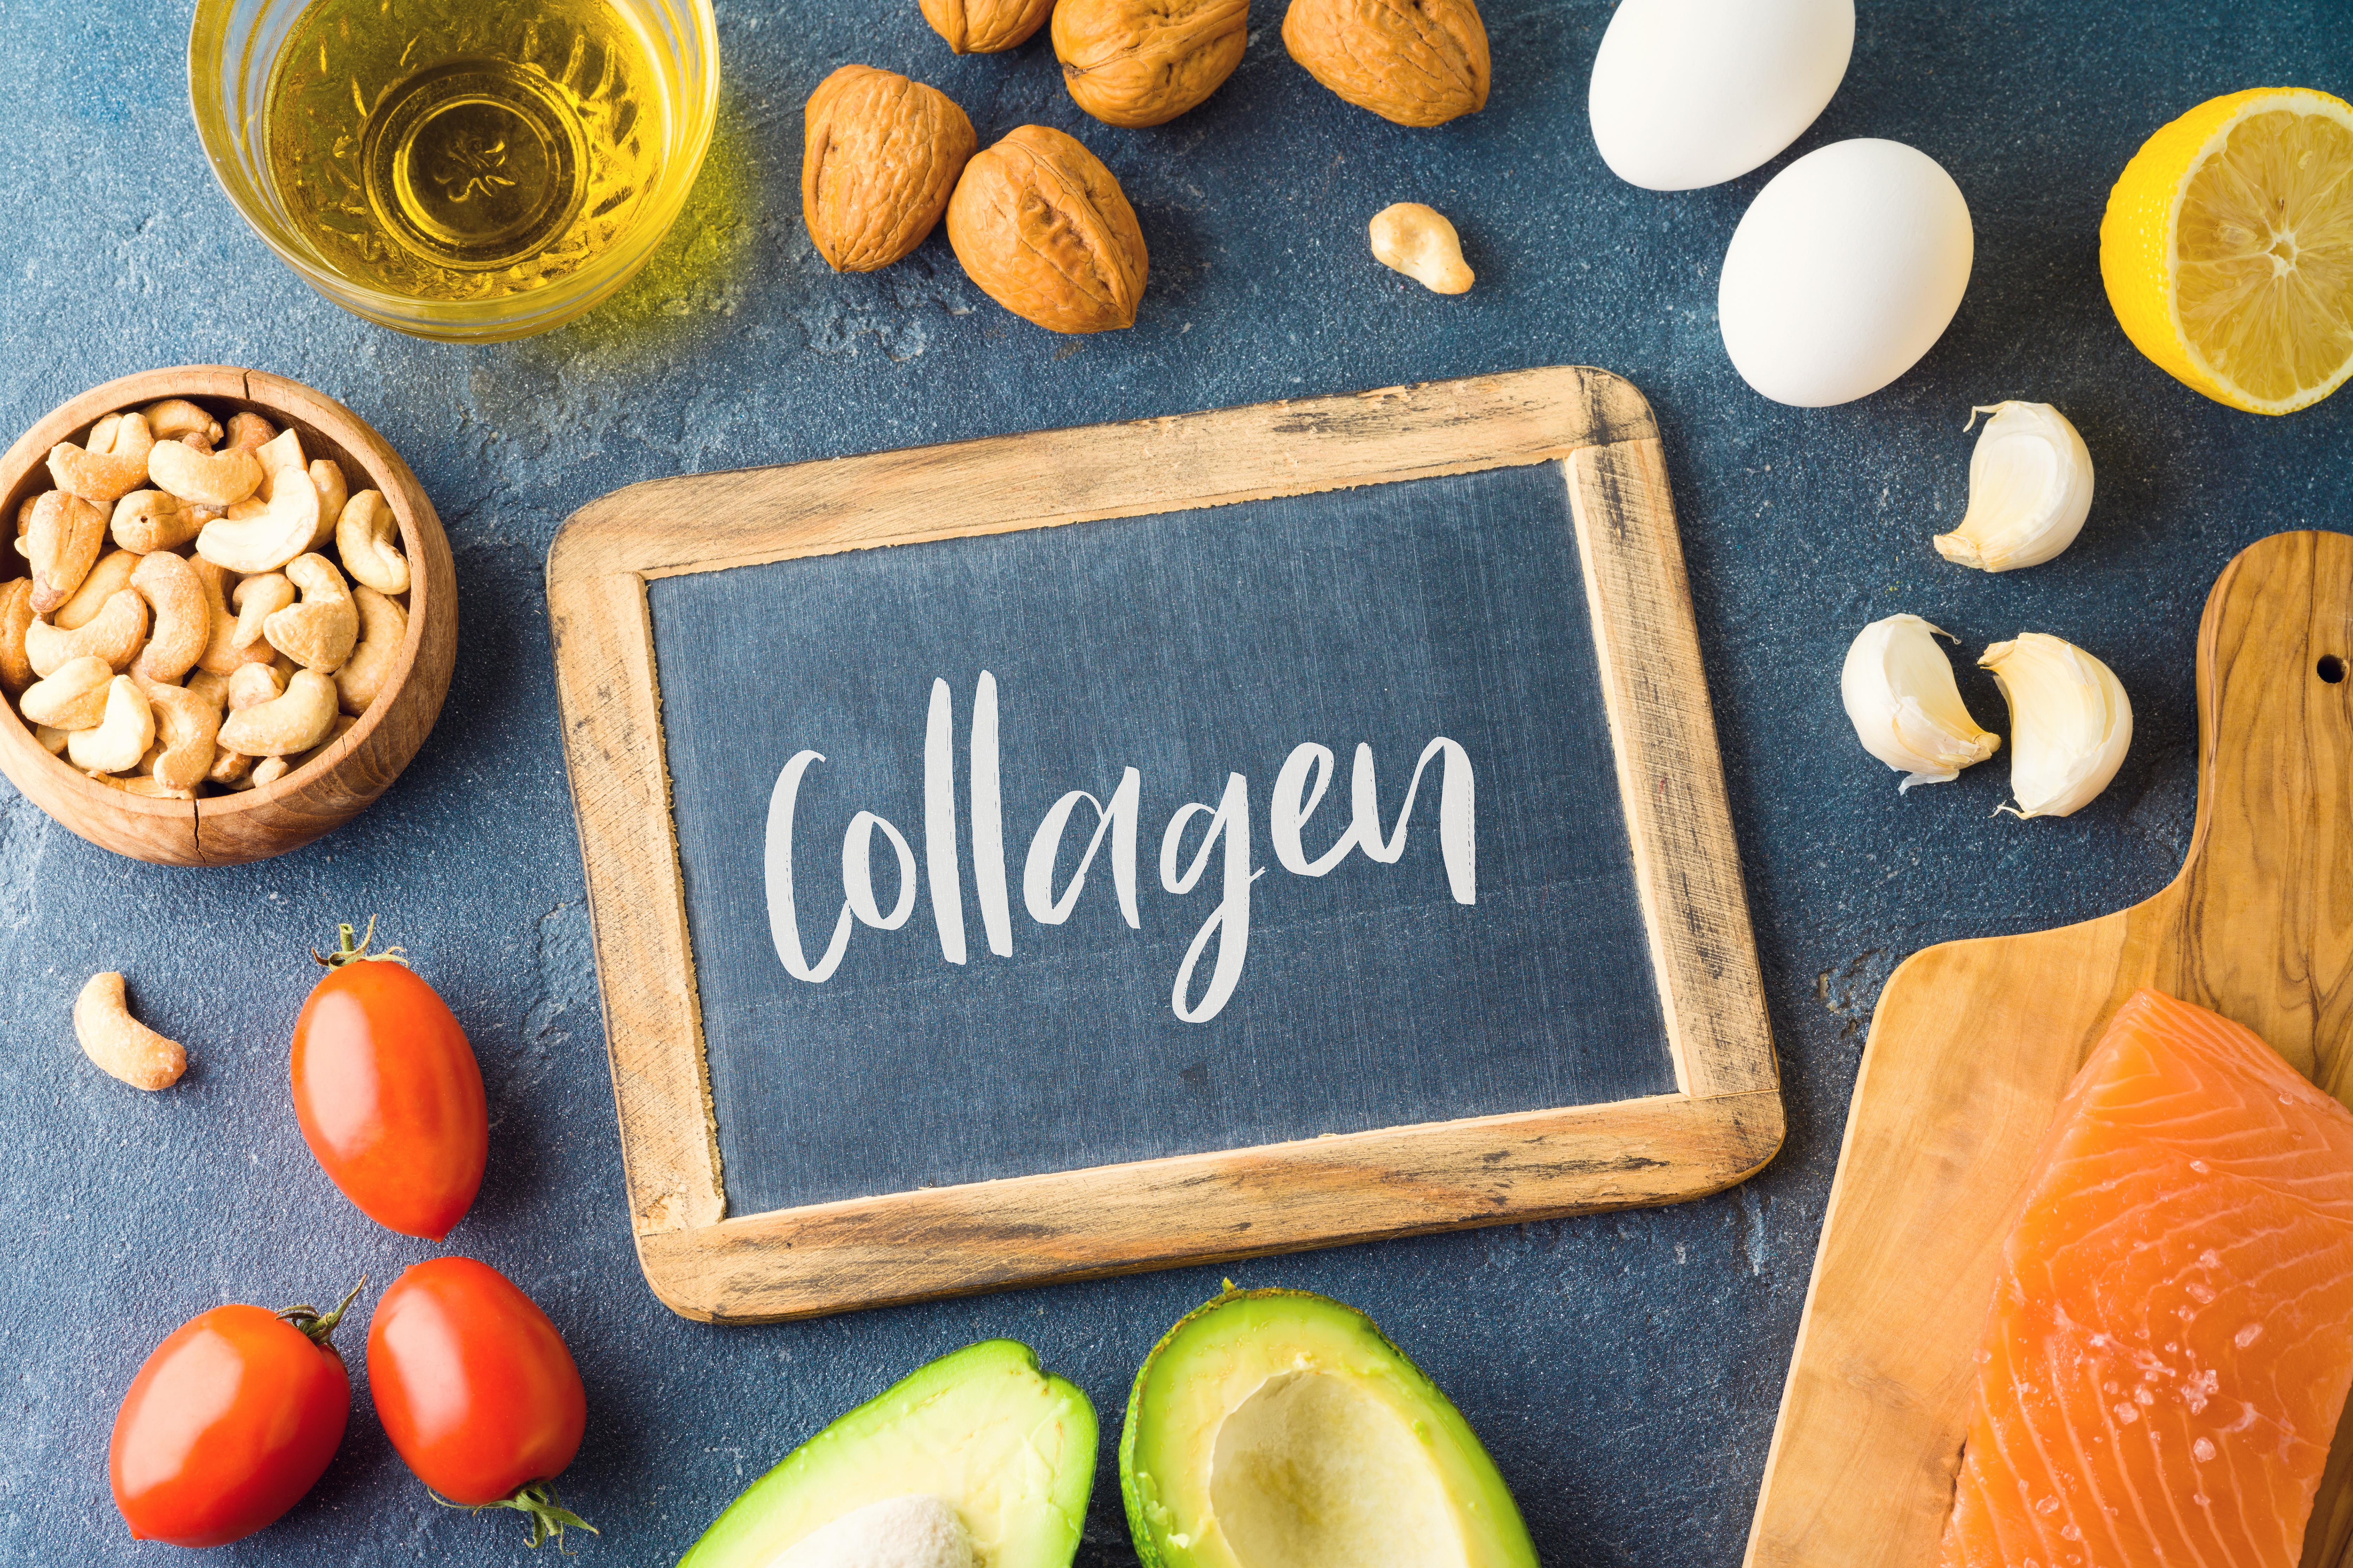 Keto and Collagen